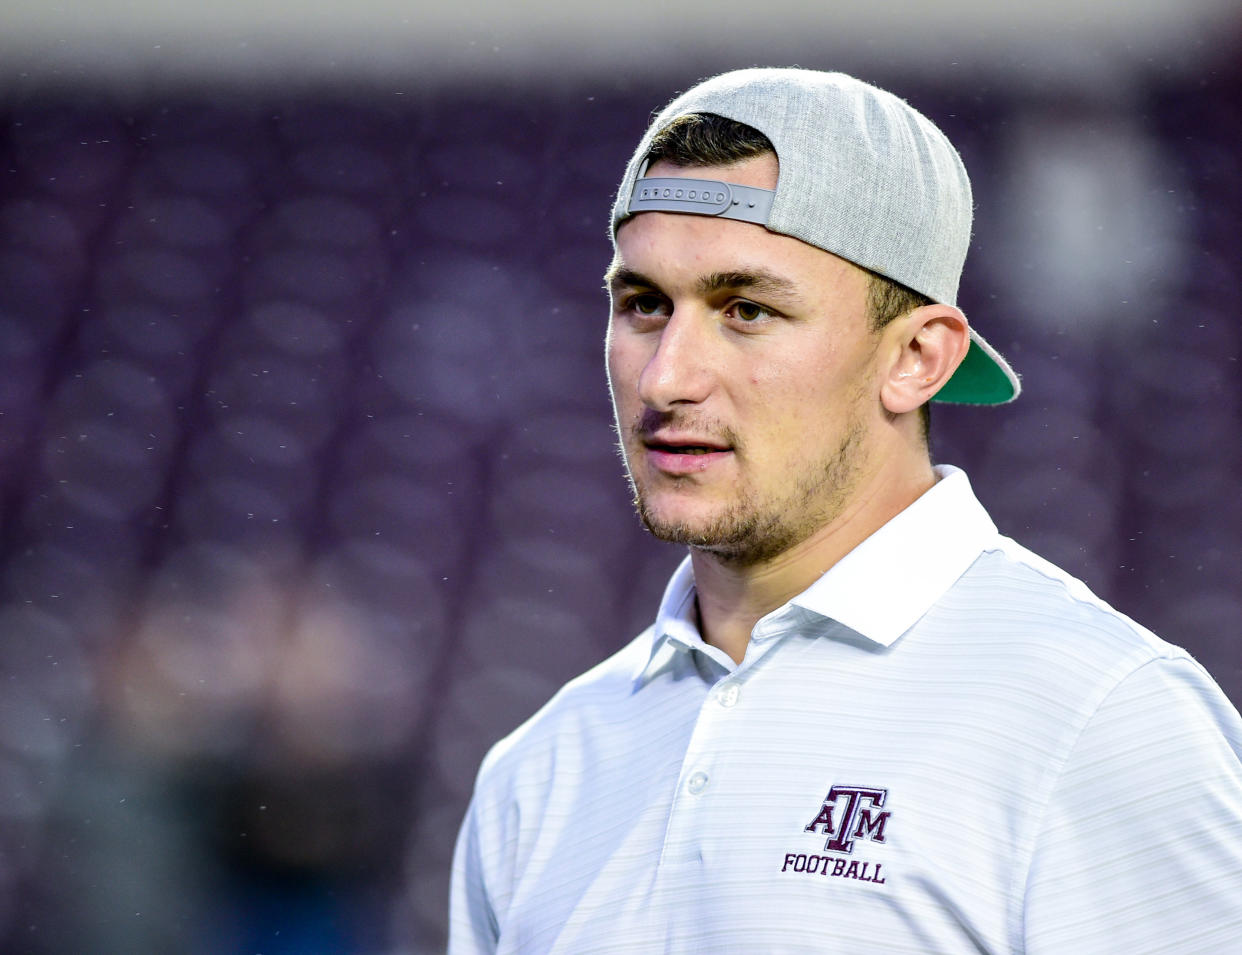 Johnny Manziel will apparently open a bar near Texas A&M's campus. (Photo by Ken Murray/Icon Sportswire)